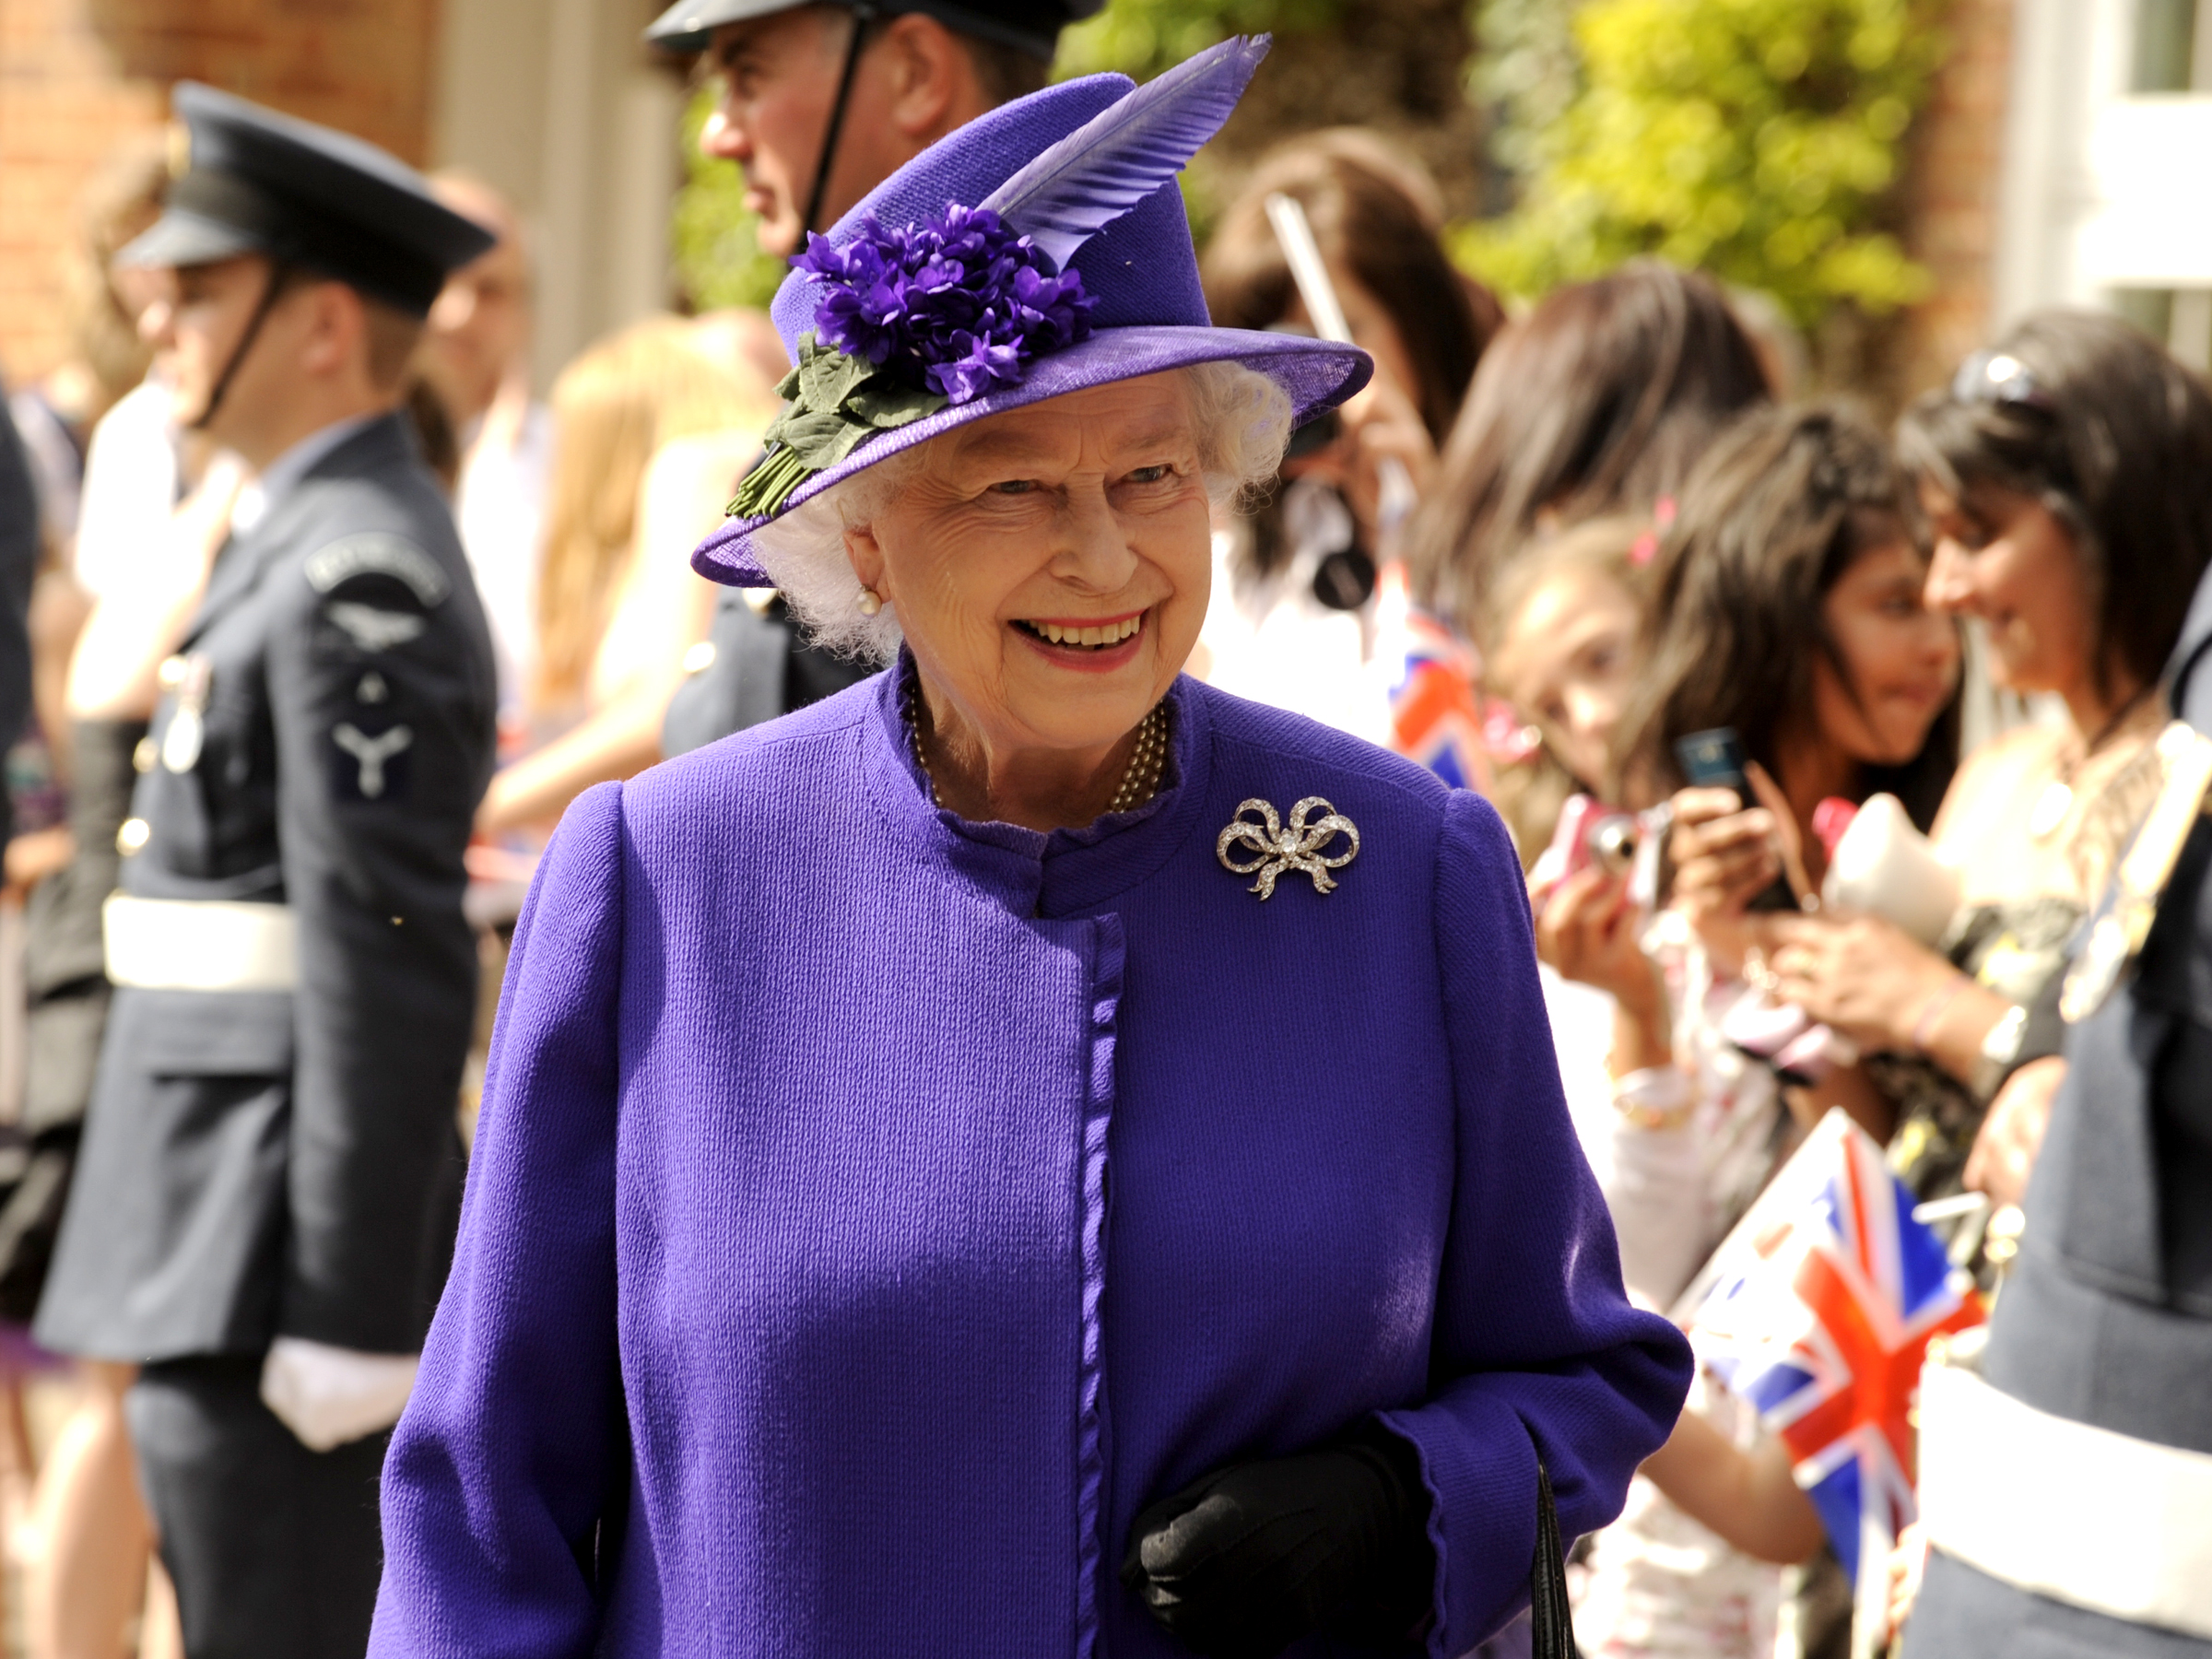 The Queen walks past Aviators and the public.